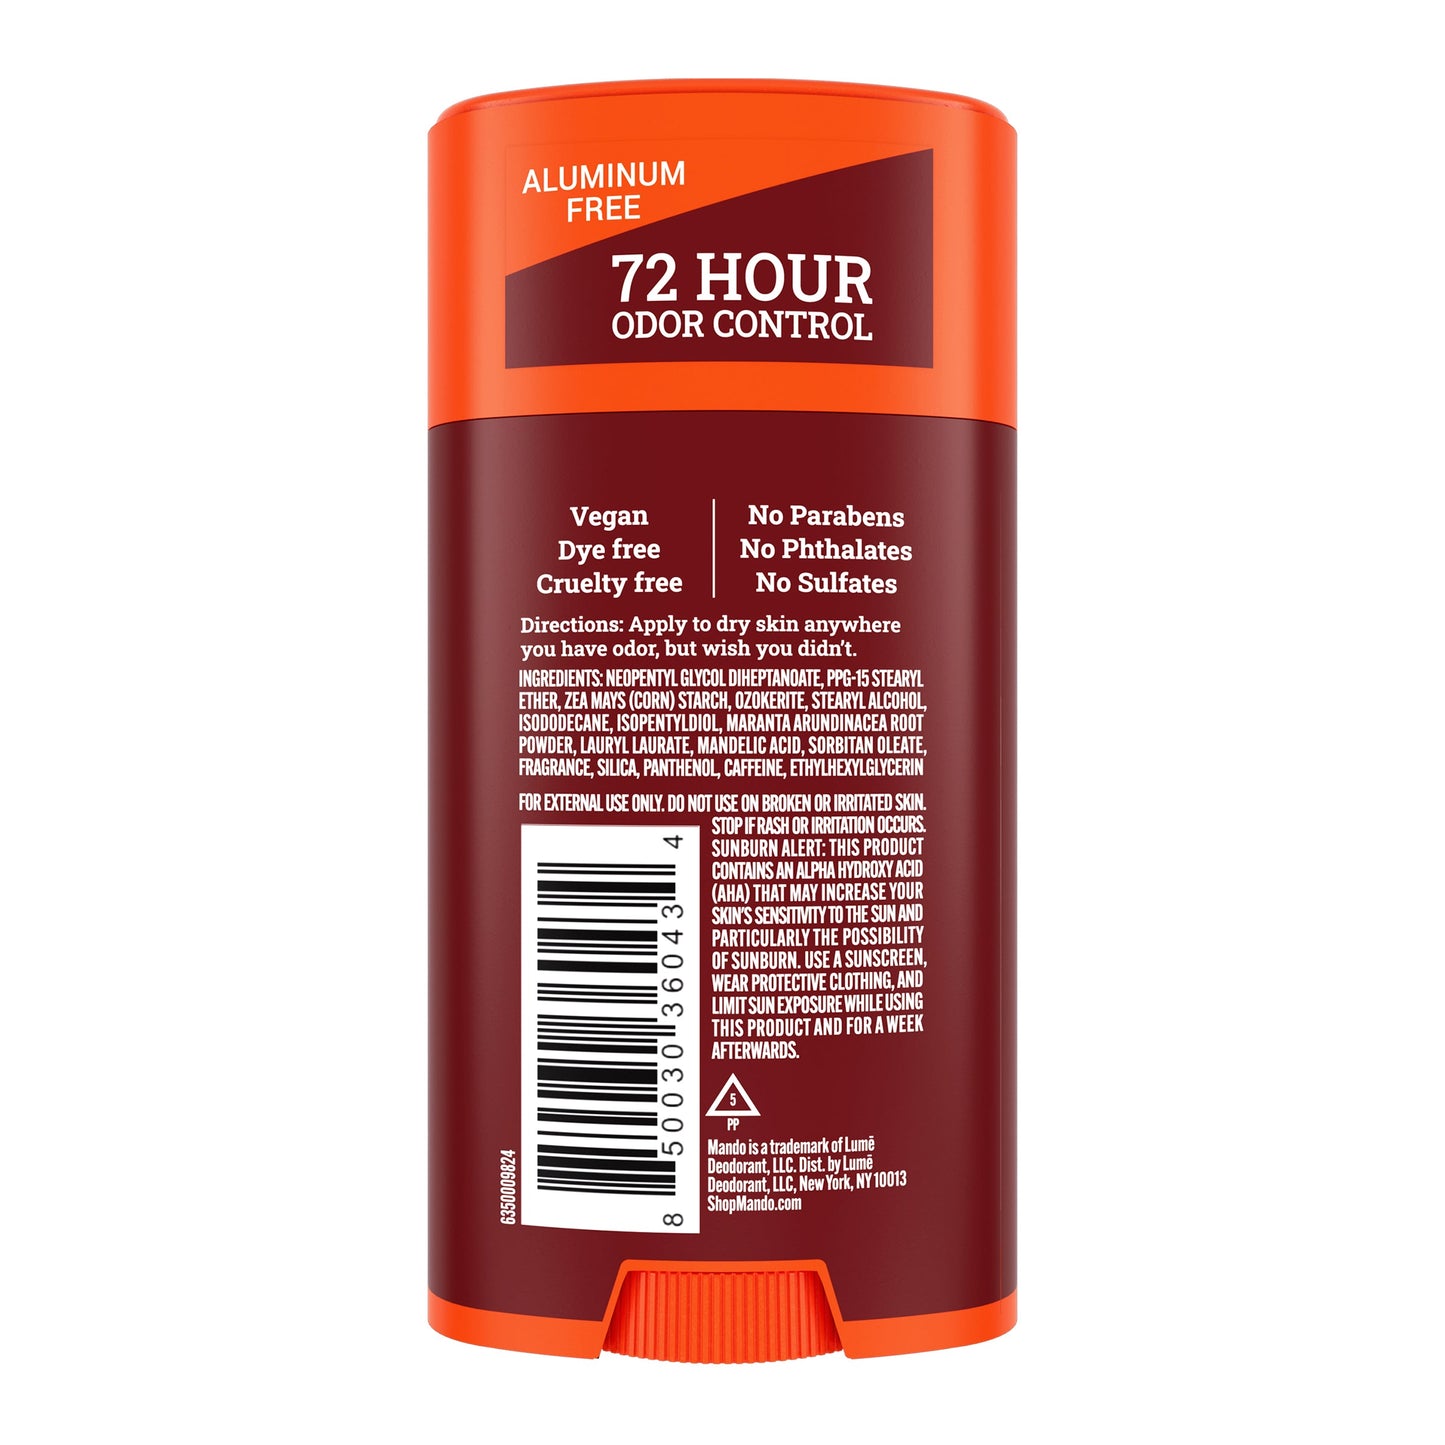 back image of bourbon leather smooth solid deodorant stick with ingredients list and text: aluminum free, 72 hour odor control